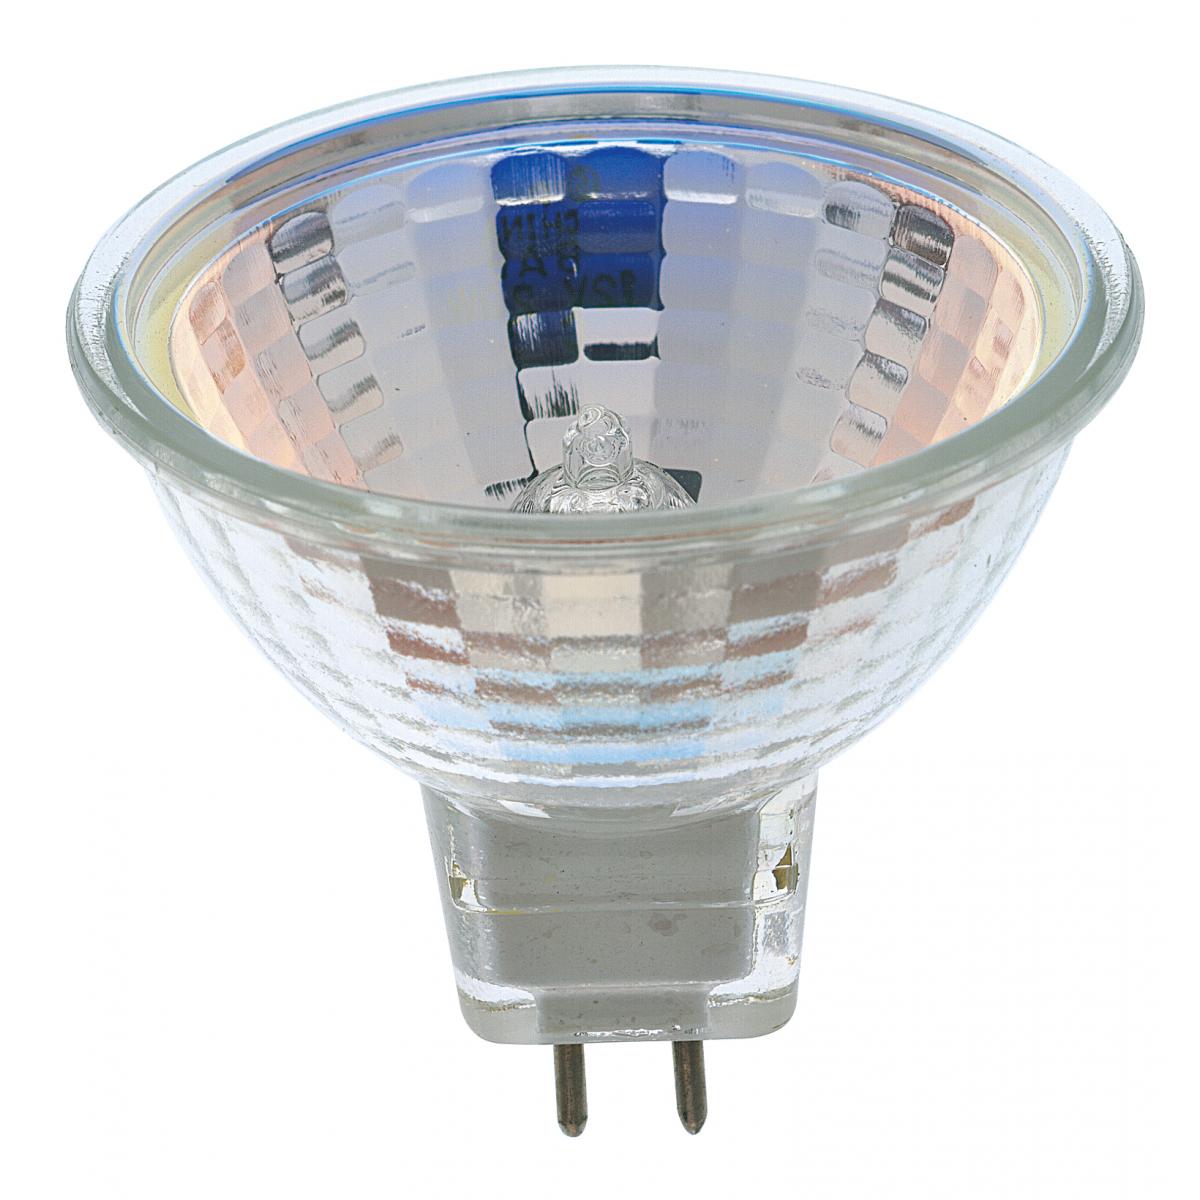 Replacement for SATCO S1964 65MR16 FPB 65W MR16 Flood 12V Halogen - NOW LED S8641